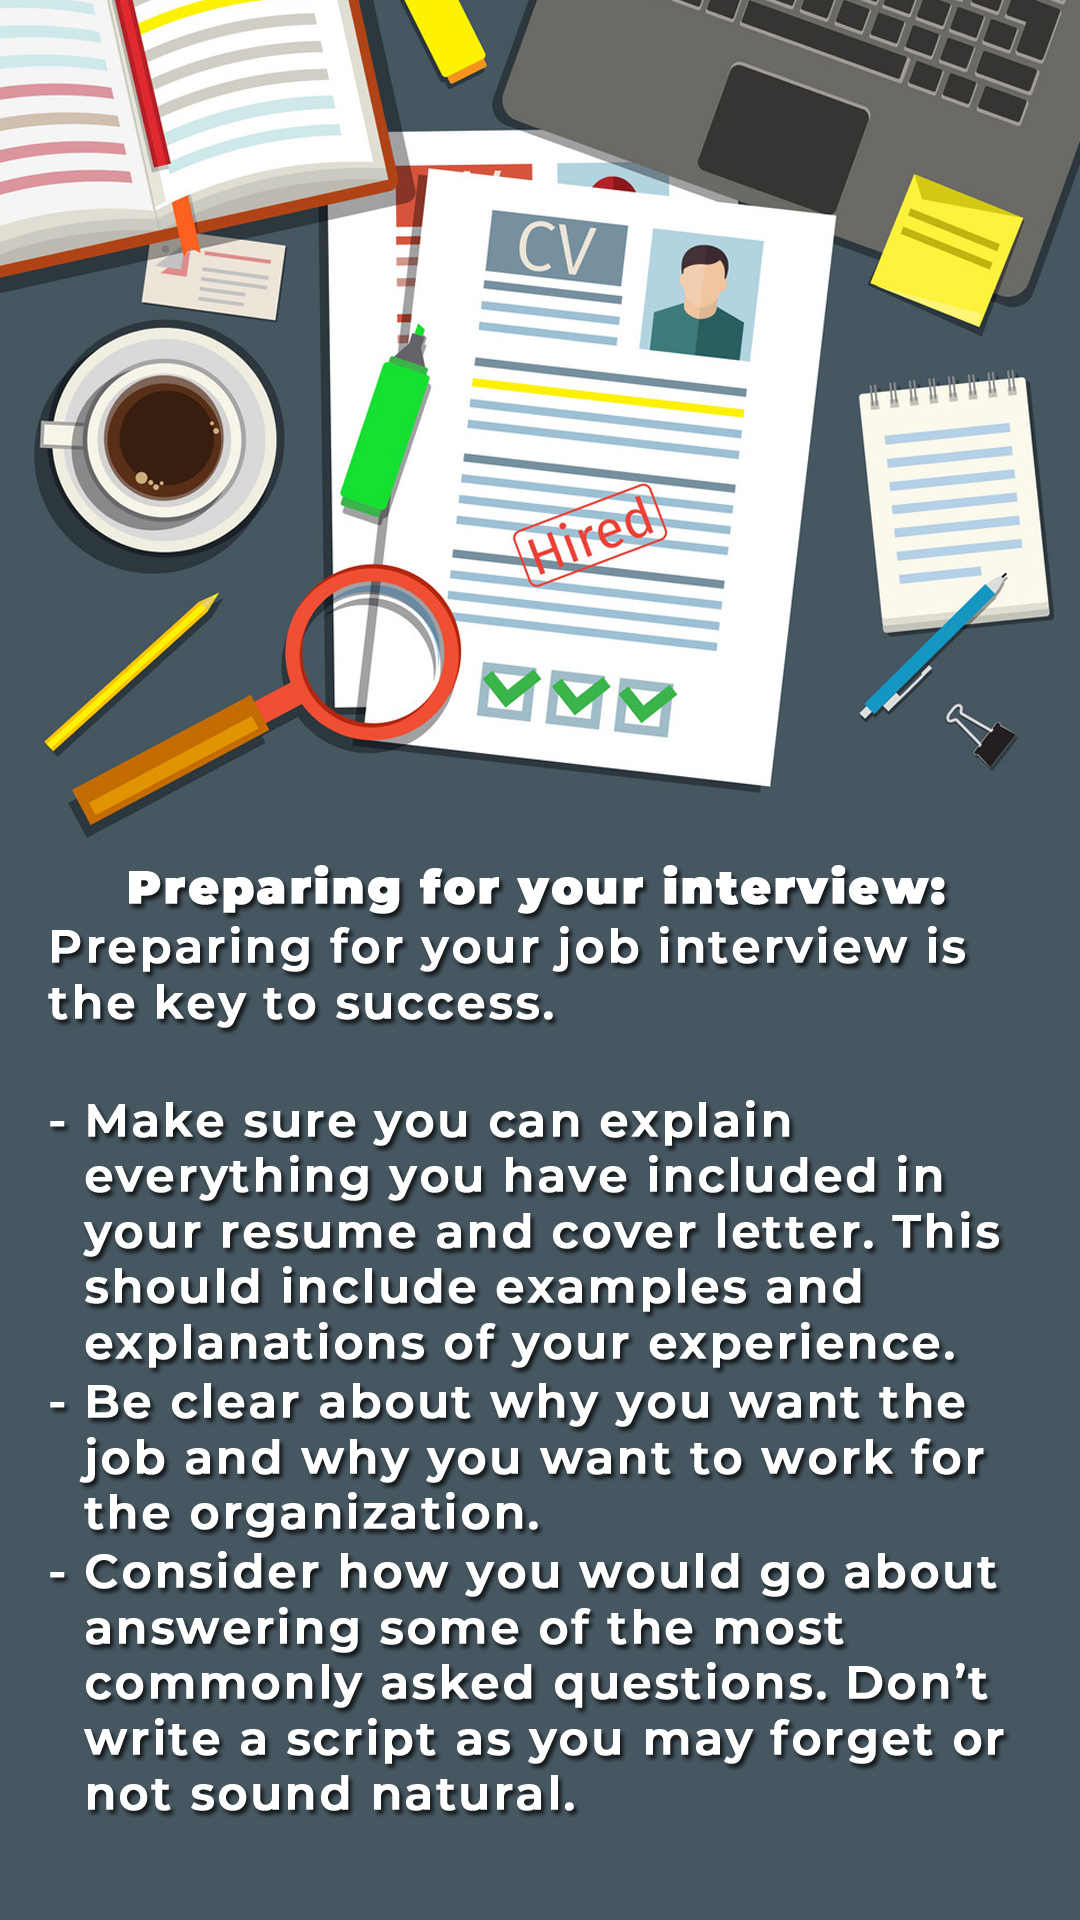 PREPARING FOR YOUR INTERVIEW